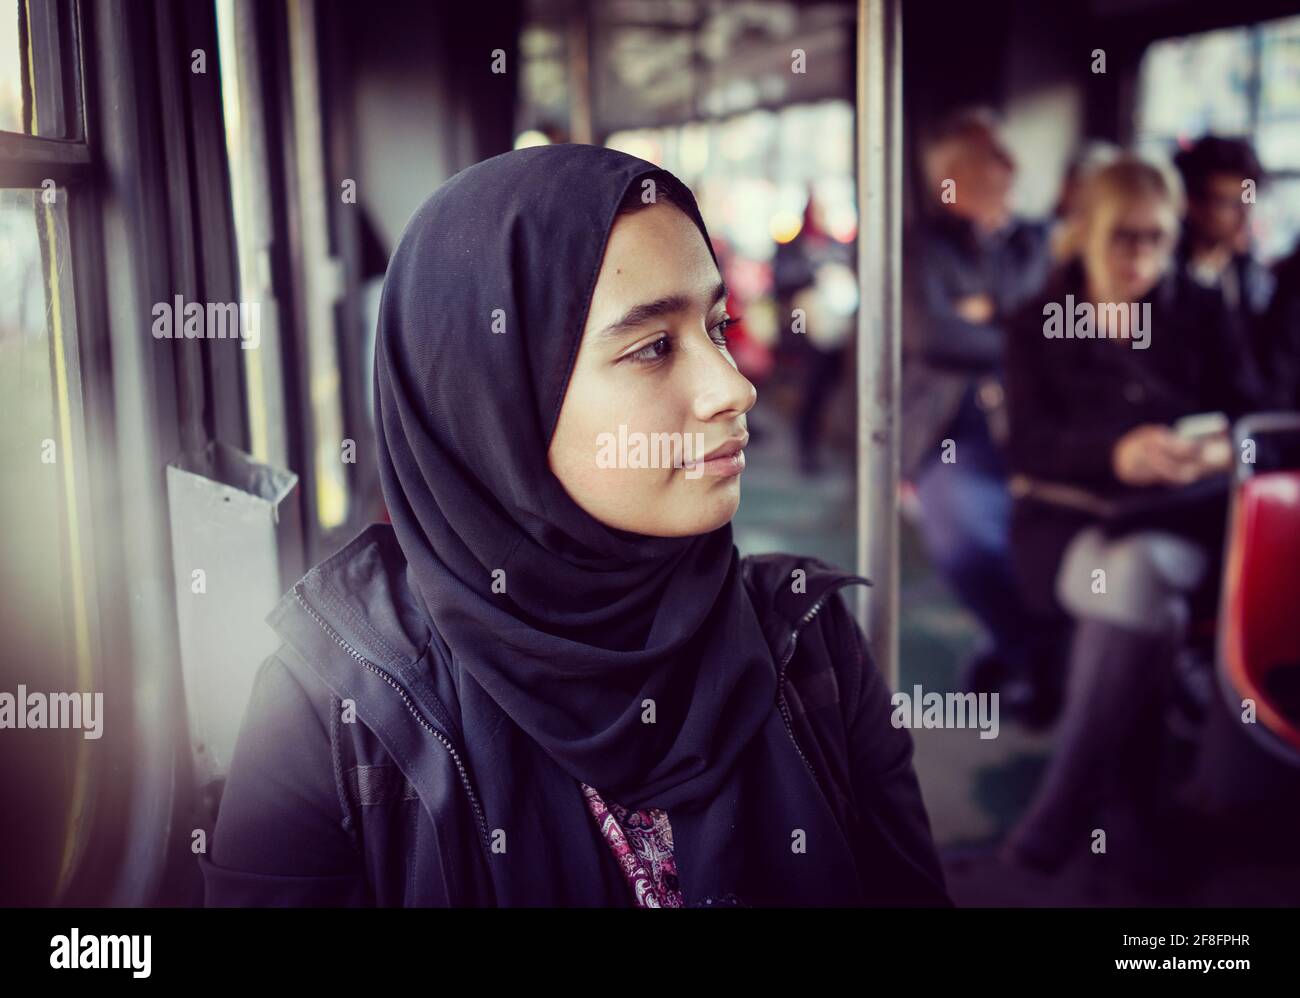 Middle Eastern girl riding public transport in the city Stock Photo